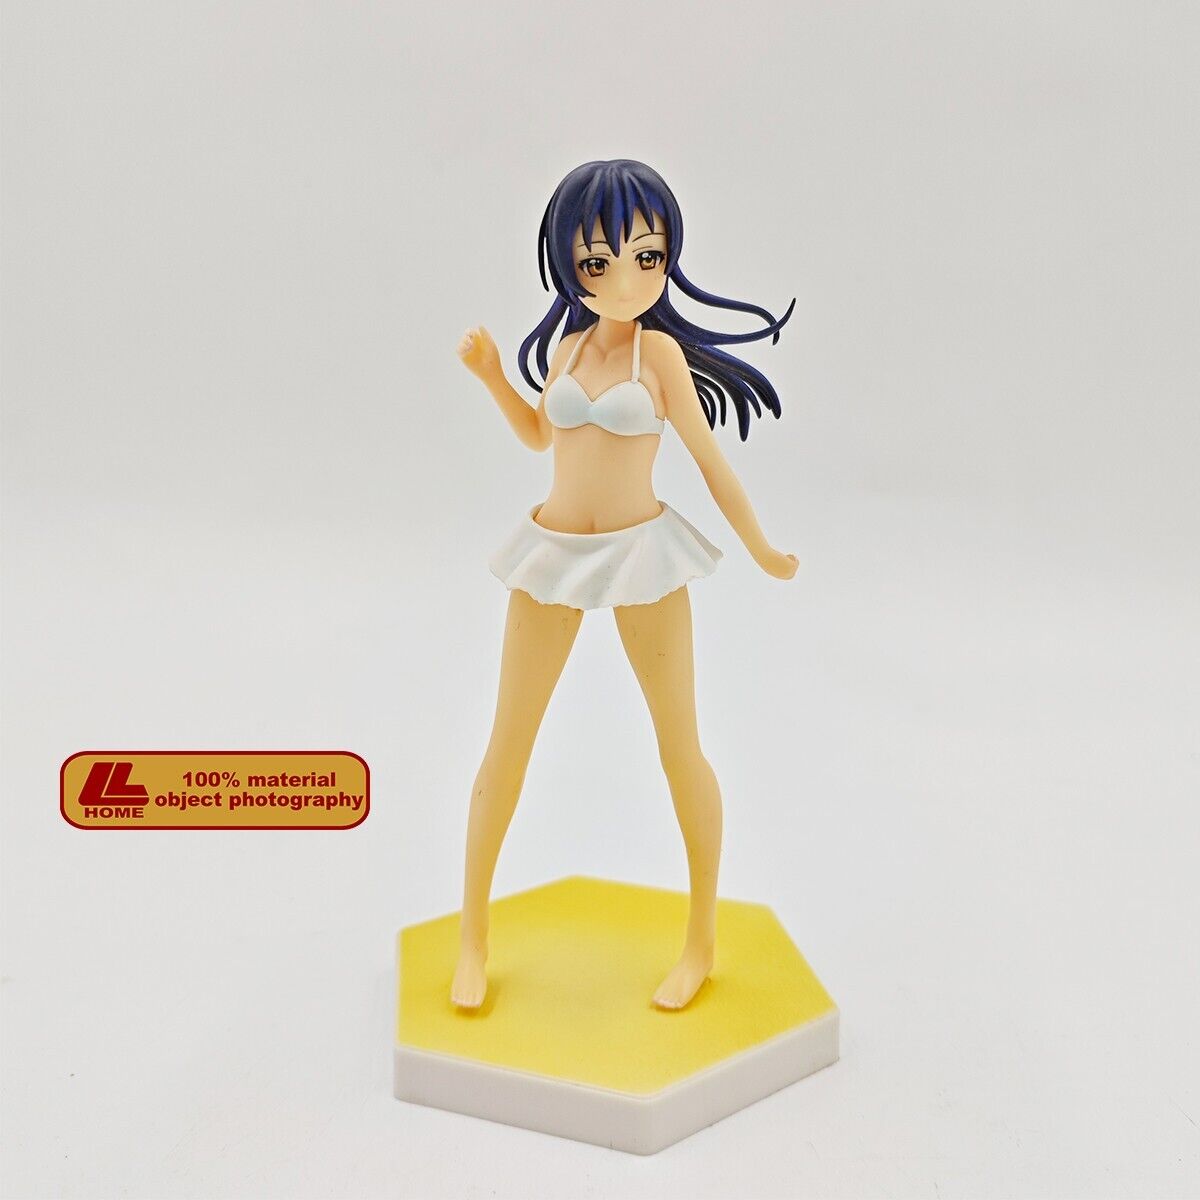 Anime LL Sonoda white swimsuit hot Cute girl Figure statue Toy Gift